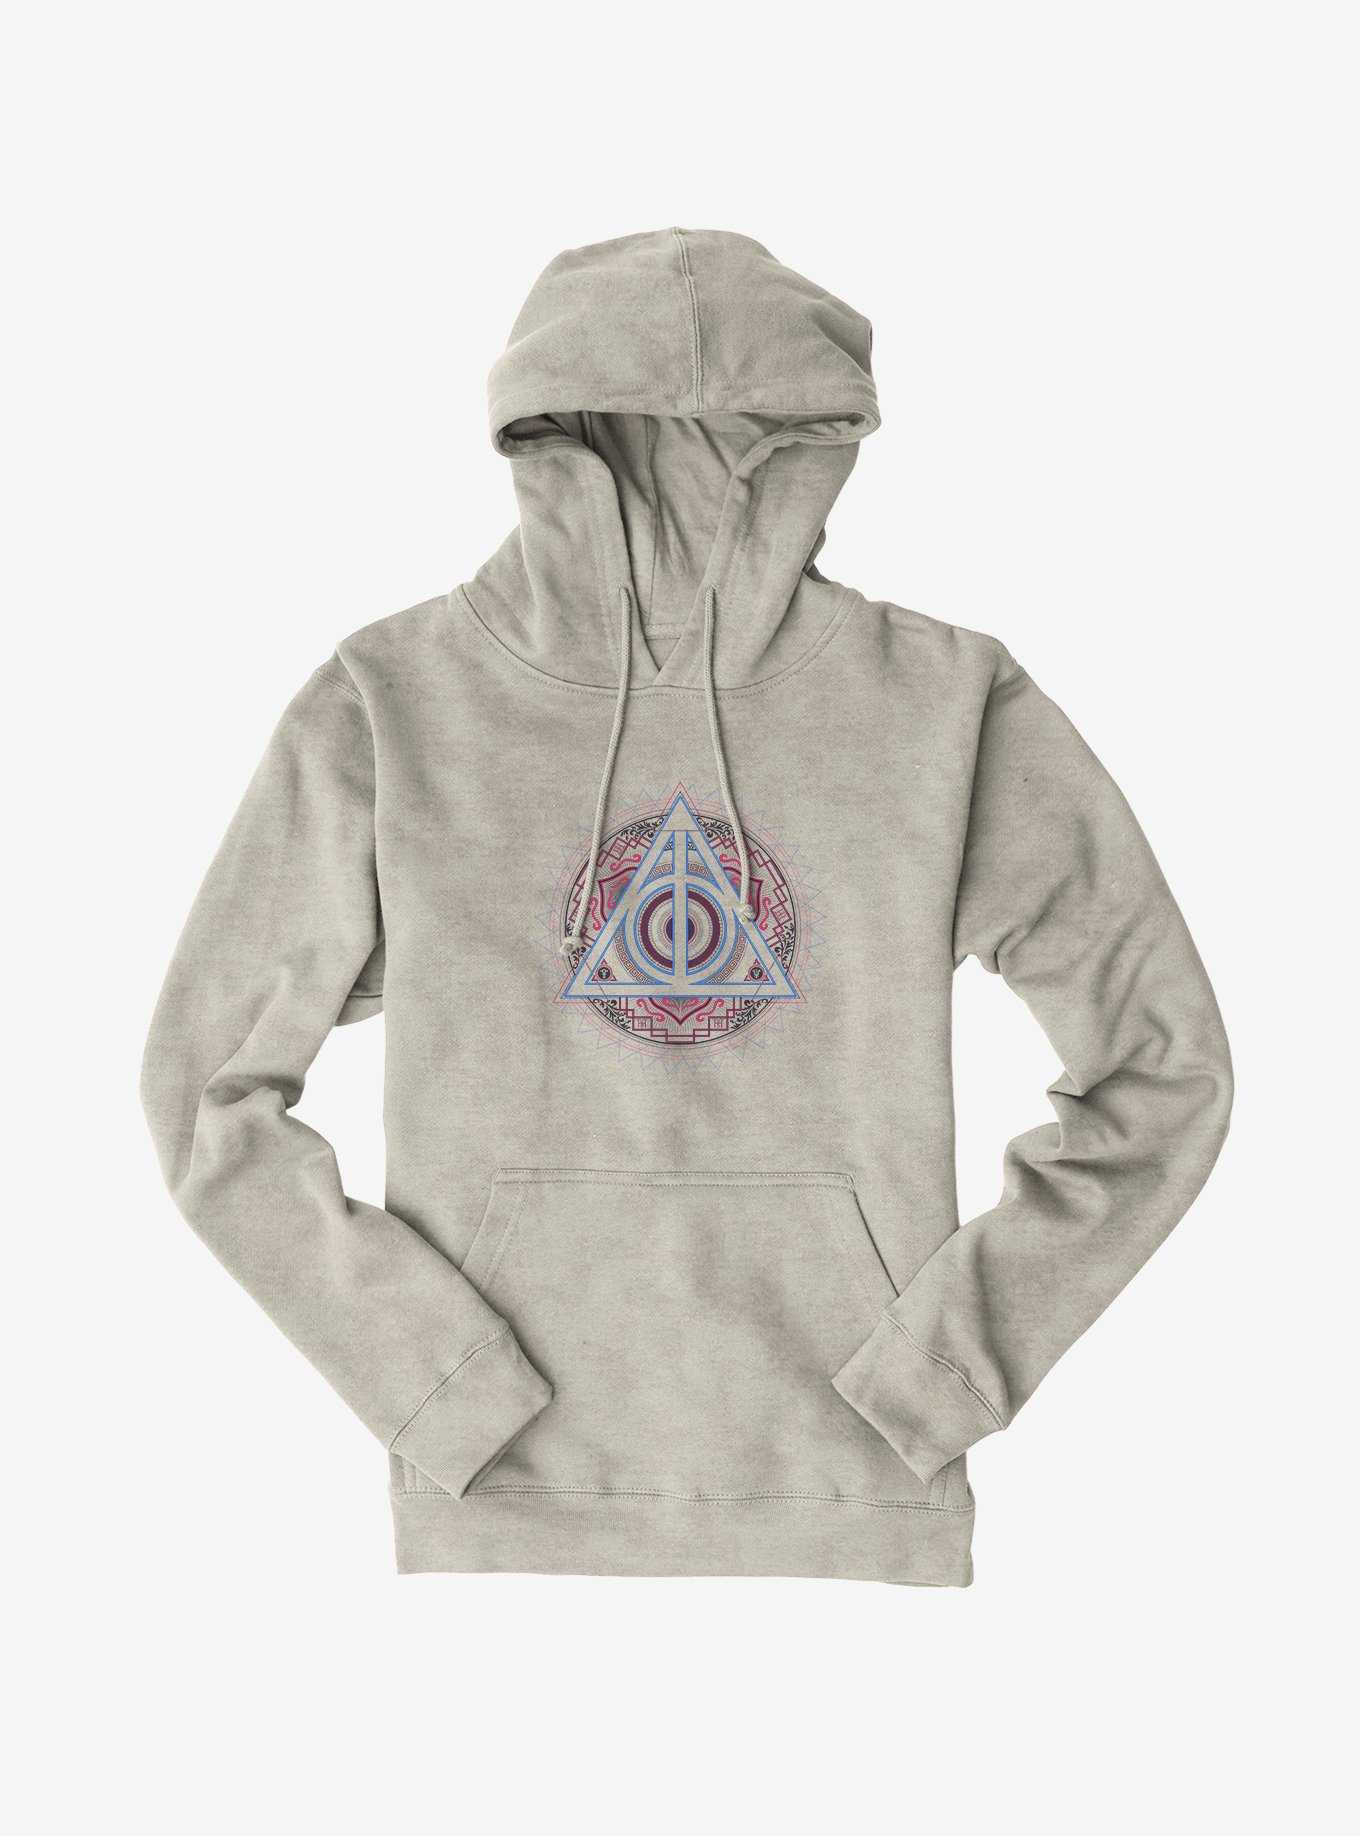 Harry Potter Deathly Hallows Symbol Decal Hoodie, , hi-res